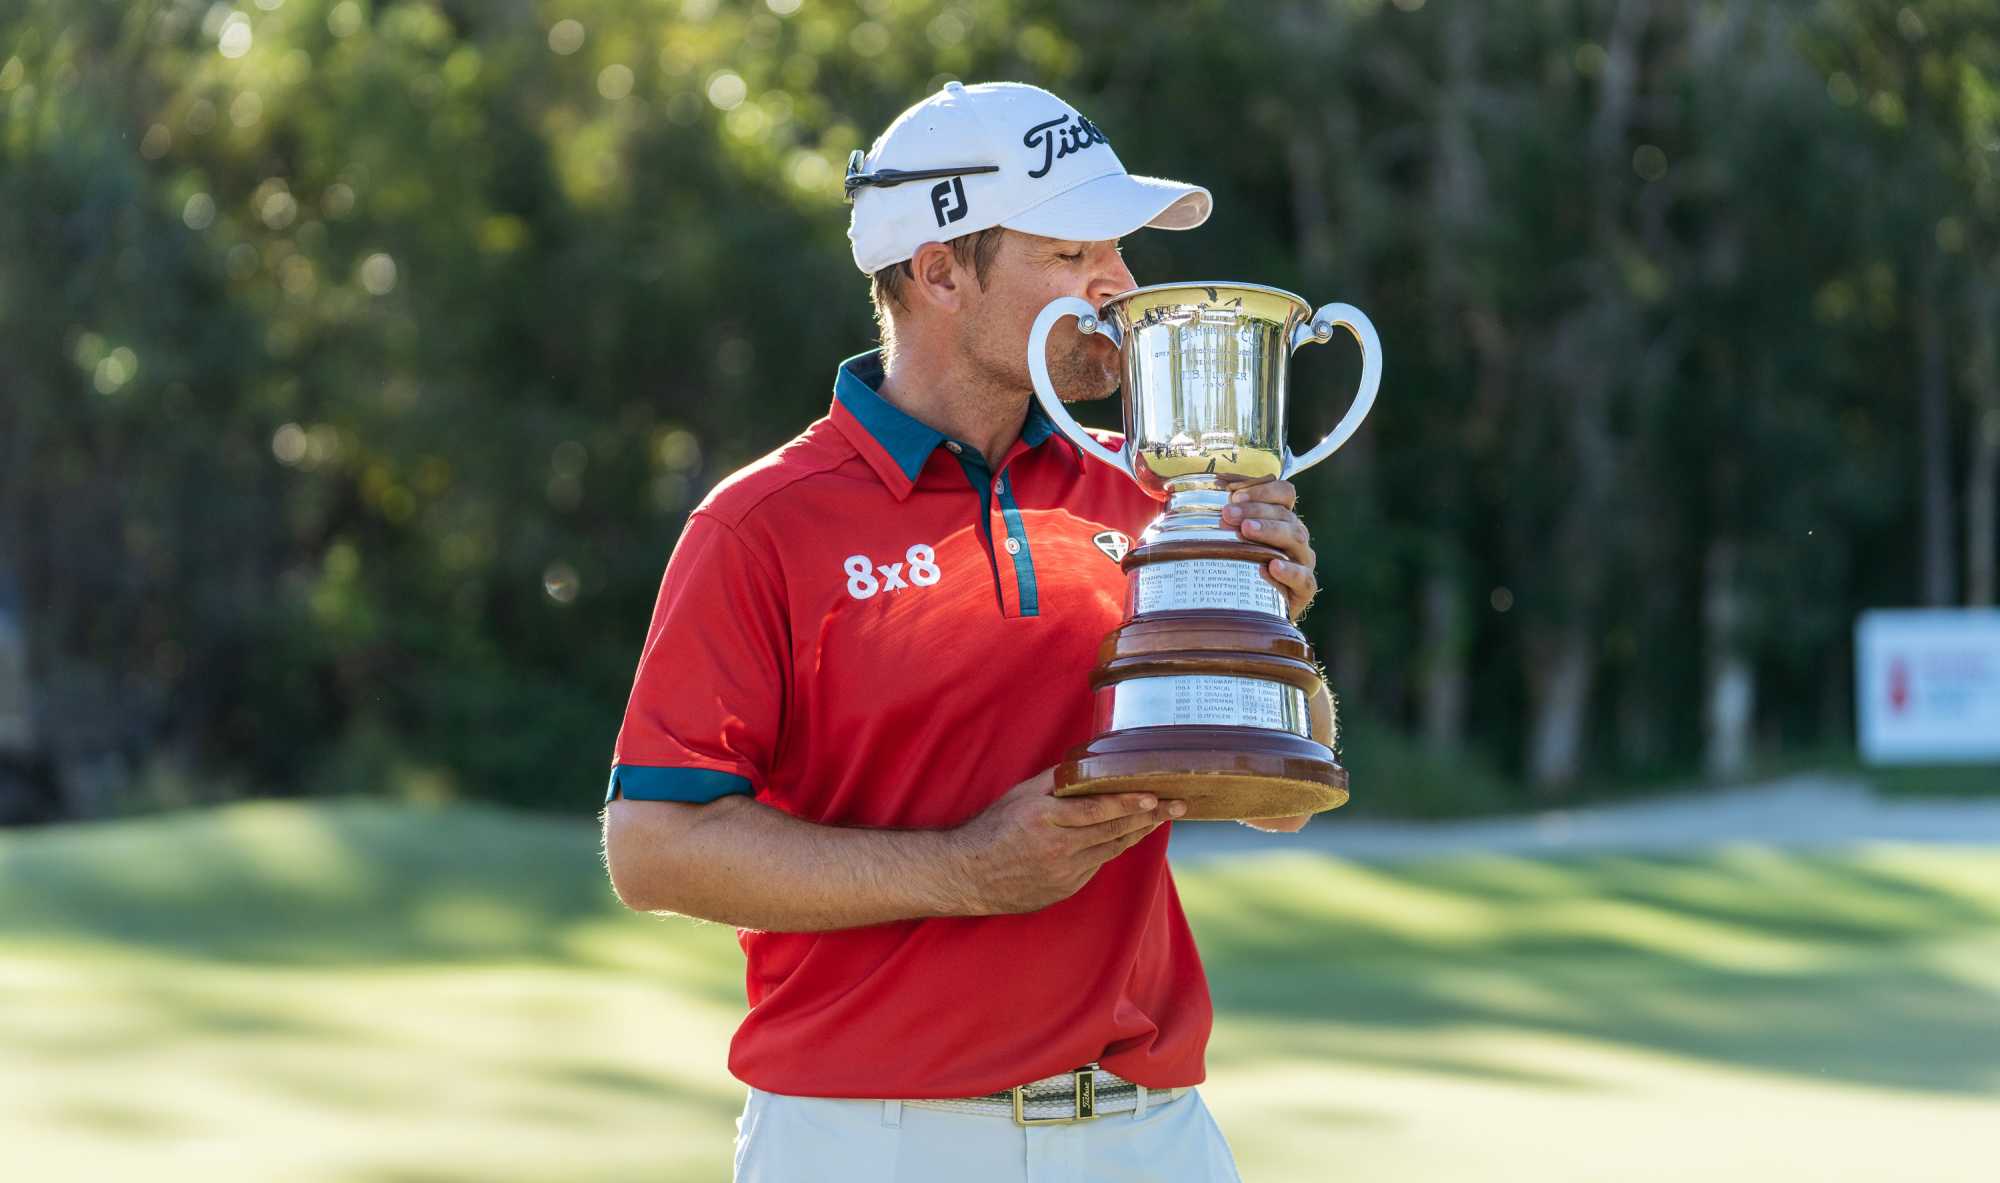 Sydney’s Andrew Evans broke a 15 year drought by winning the Isuzu Queensland Open at Pelican Waters on Sunday. Credit: Kurt Thompson.